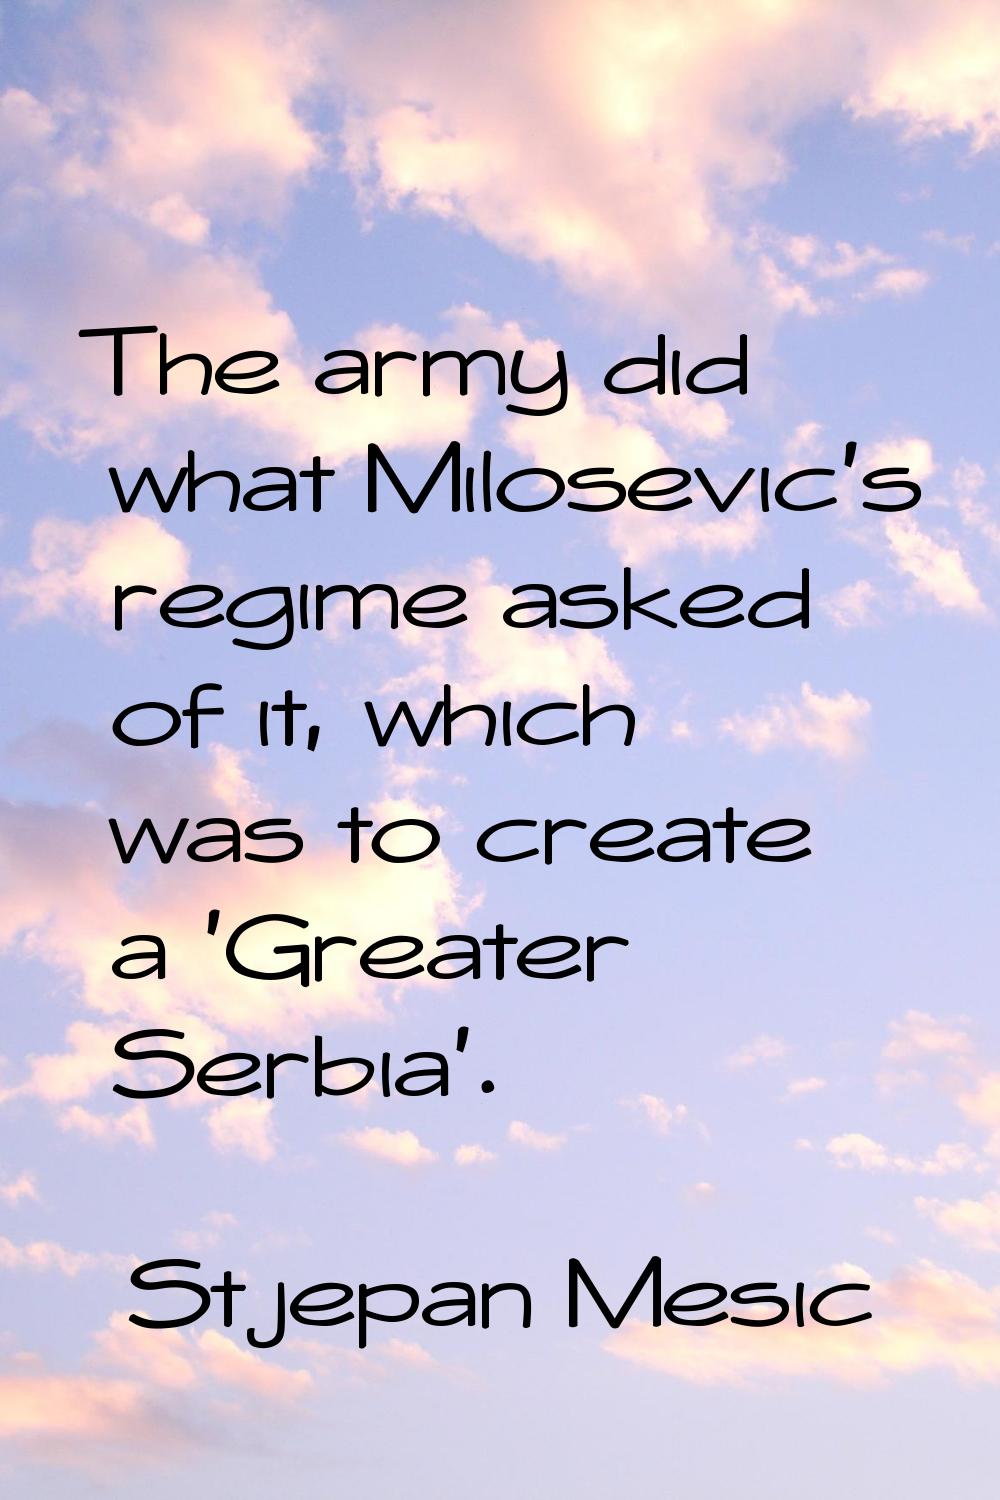 The army did what Milosevic's regime asked of it, which was to create a 'Greater Serbia'.